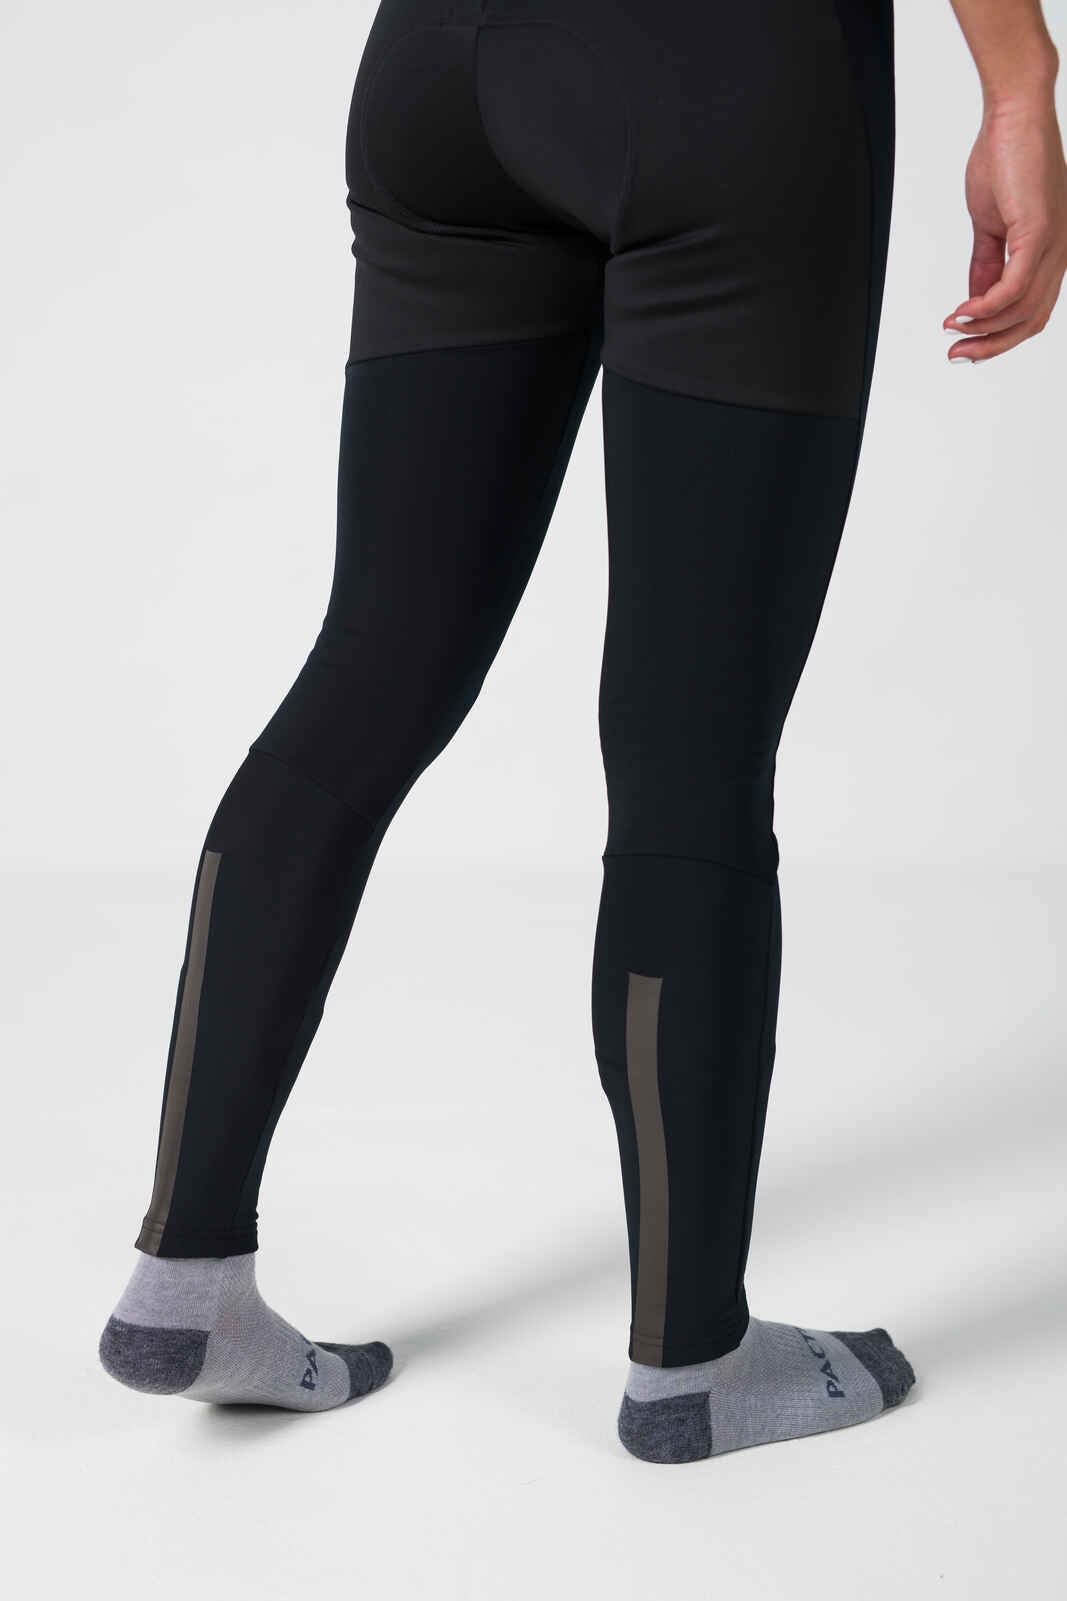 Women's Water-Resistant Thermal Cycling Bib Tights